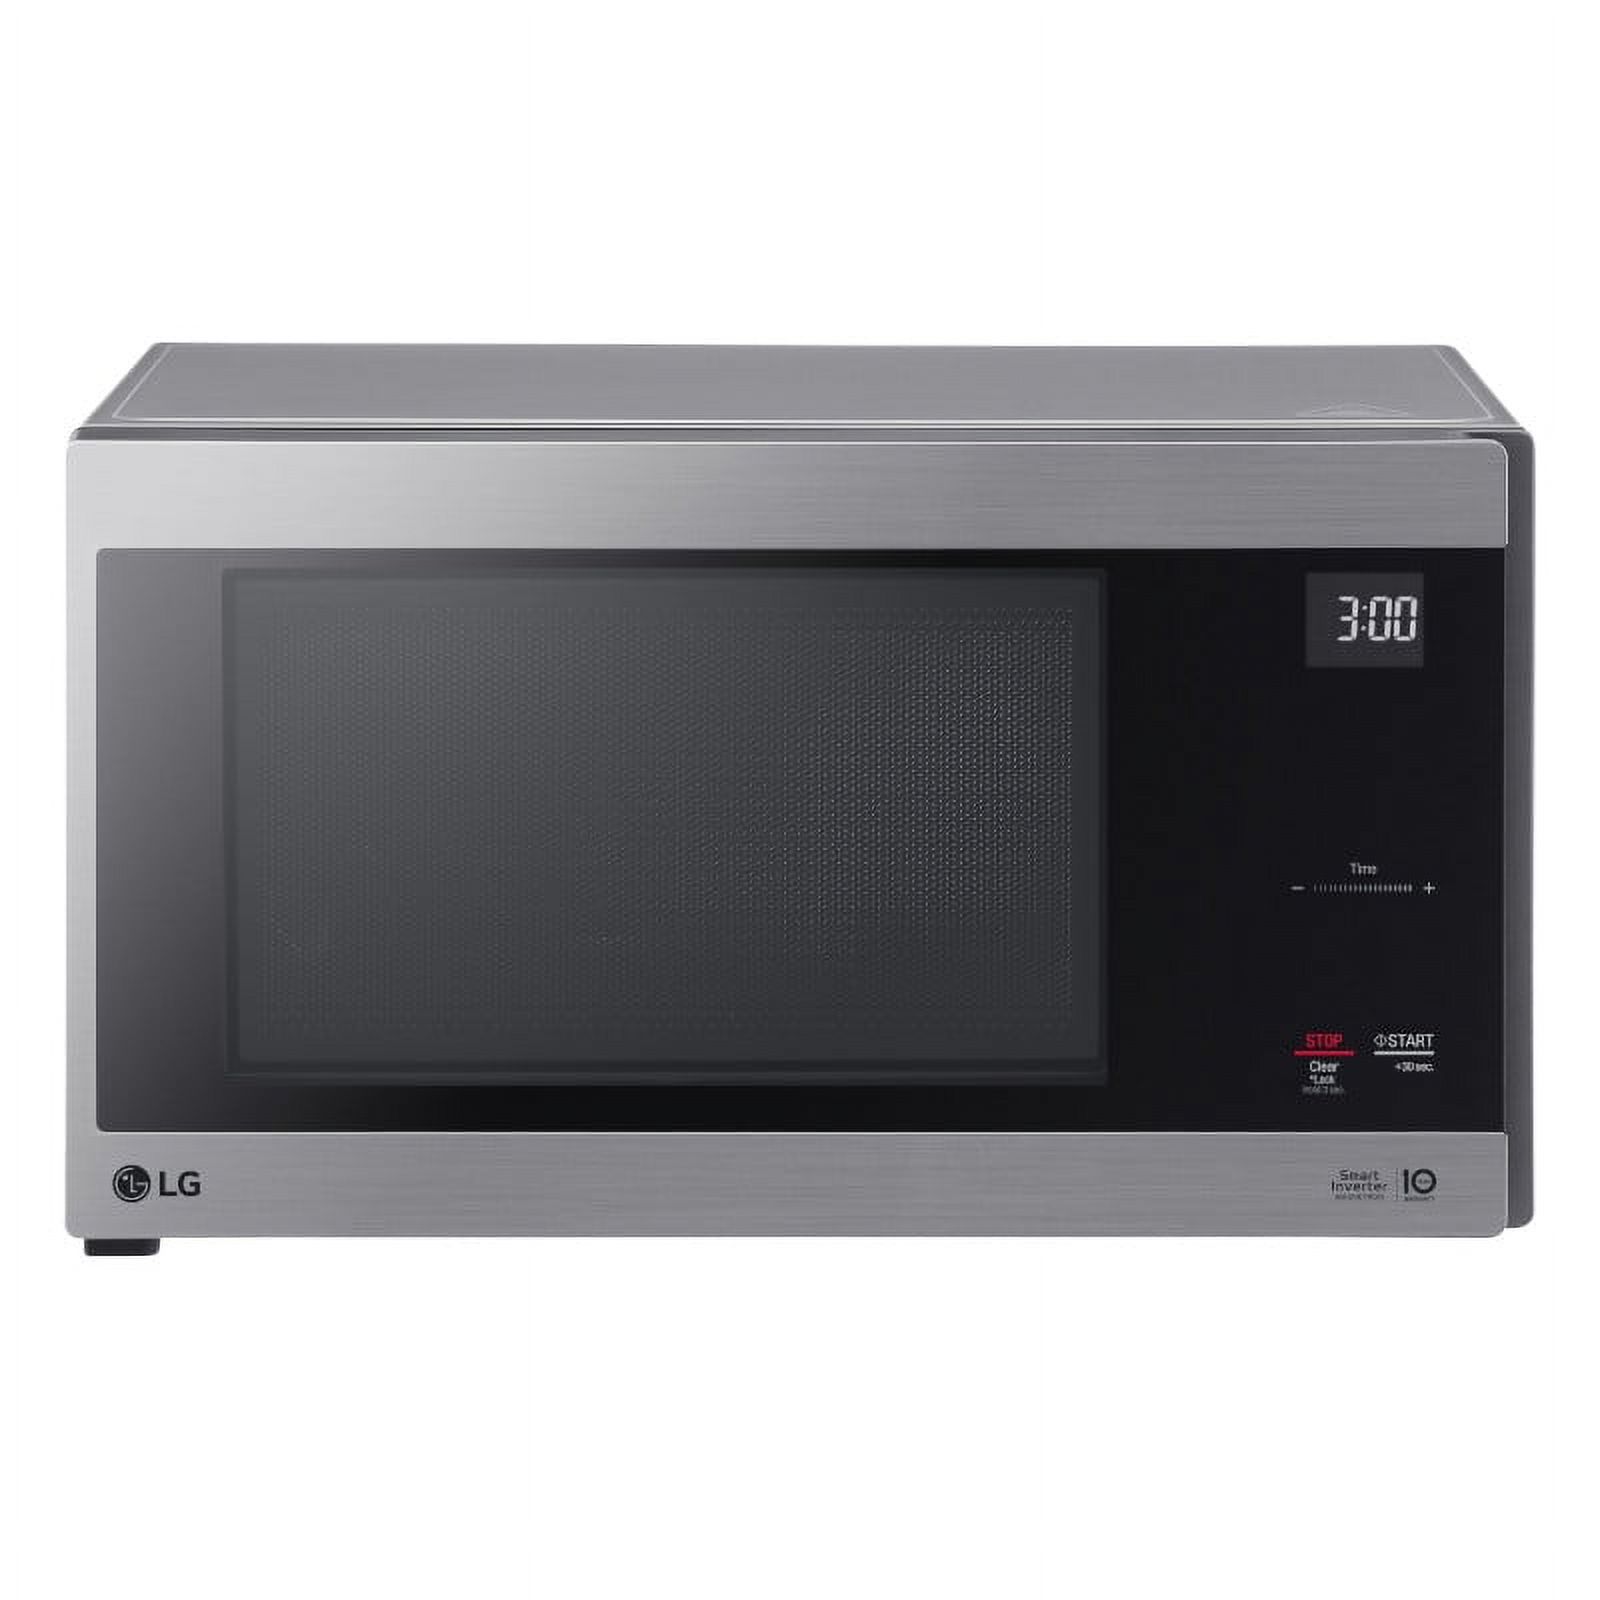 LG Neo Chef 1.5 cu. ft. Countertop Microwave Oven, 1200 Watts, Stainless Steel - image 2 of 15